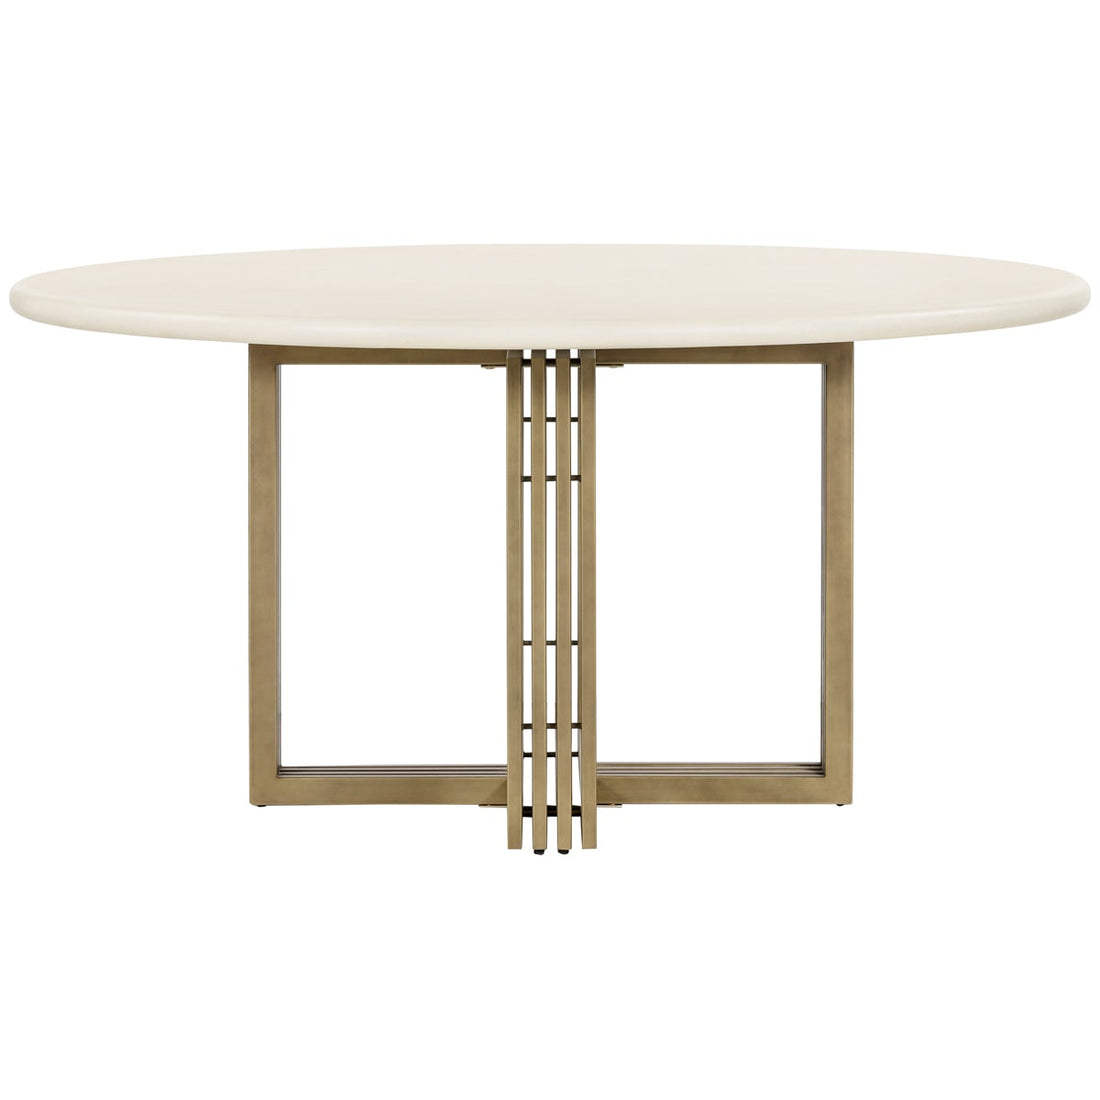 Four Hands Everett Mia Round Dining Table - Parchment White